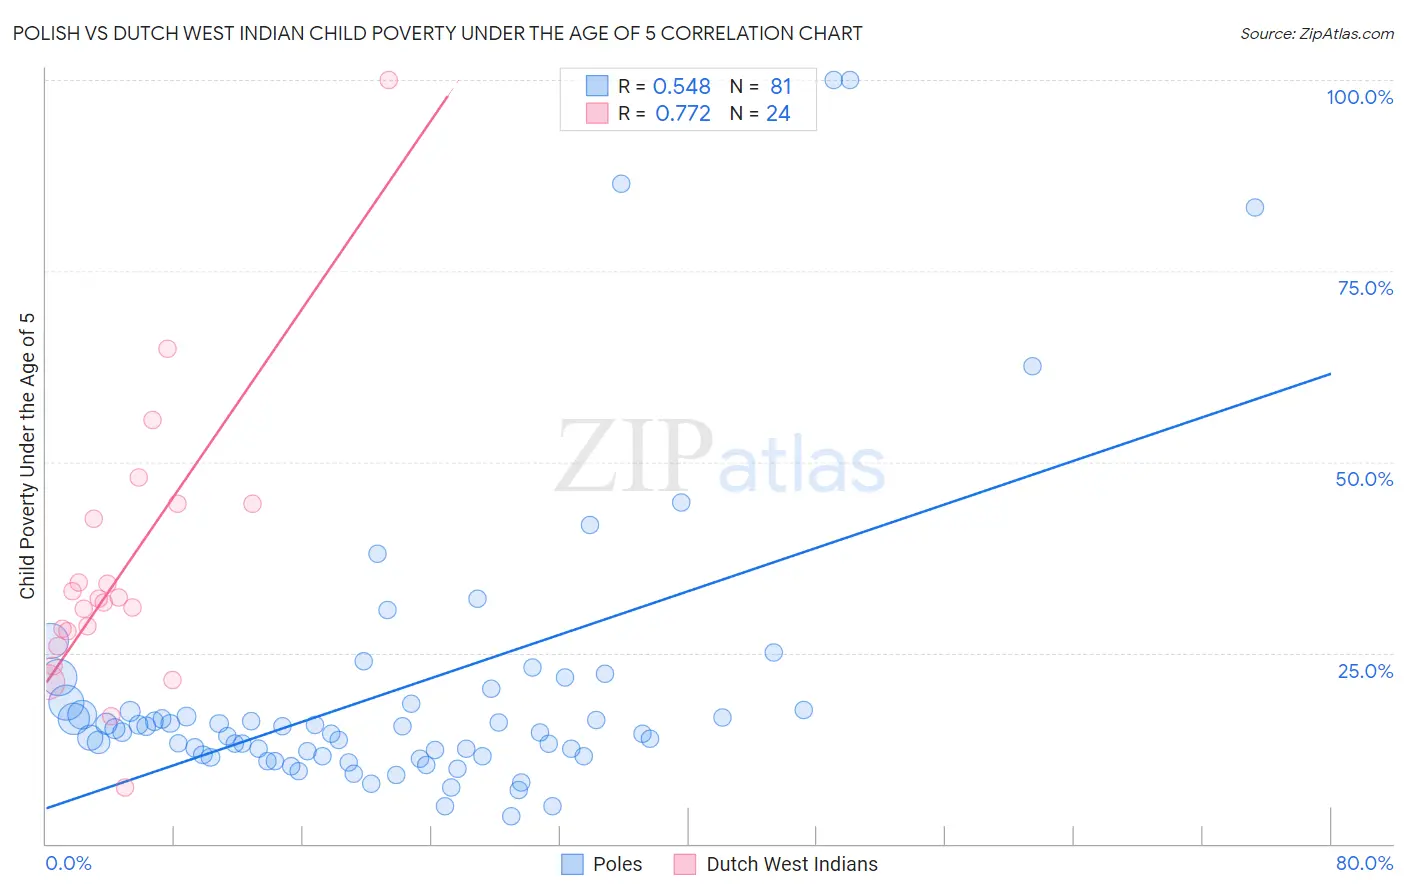 Polish vs Dutch West Indian Child Poverty Under the Age of 5